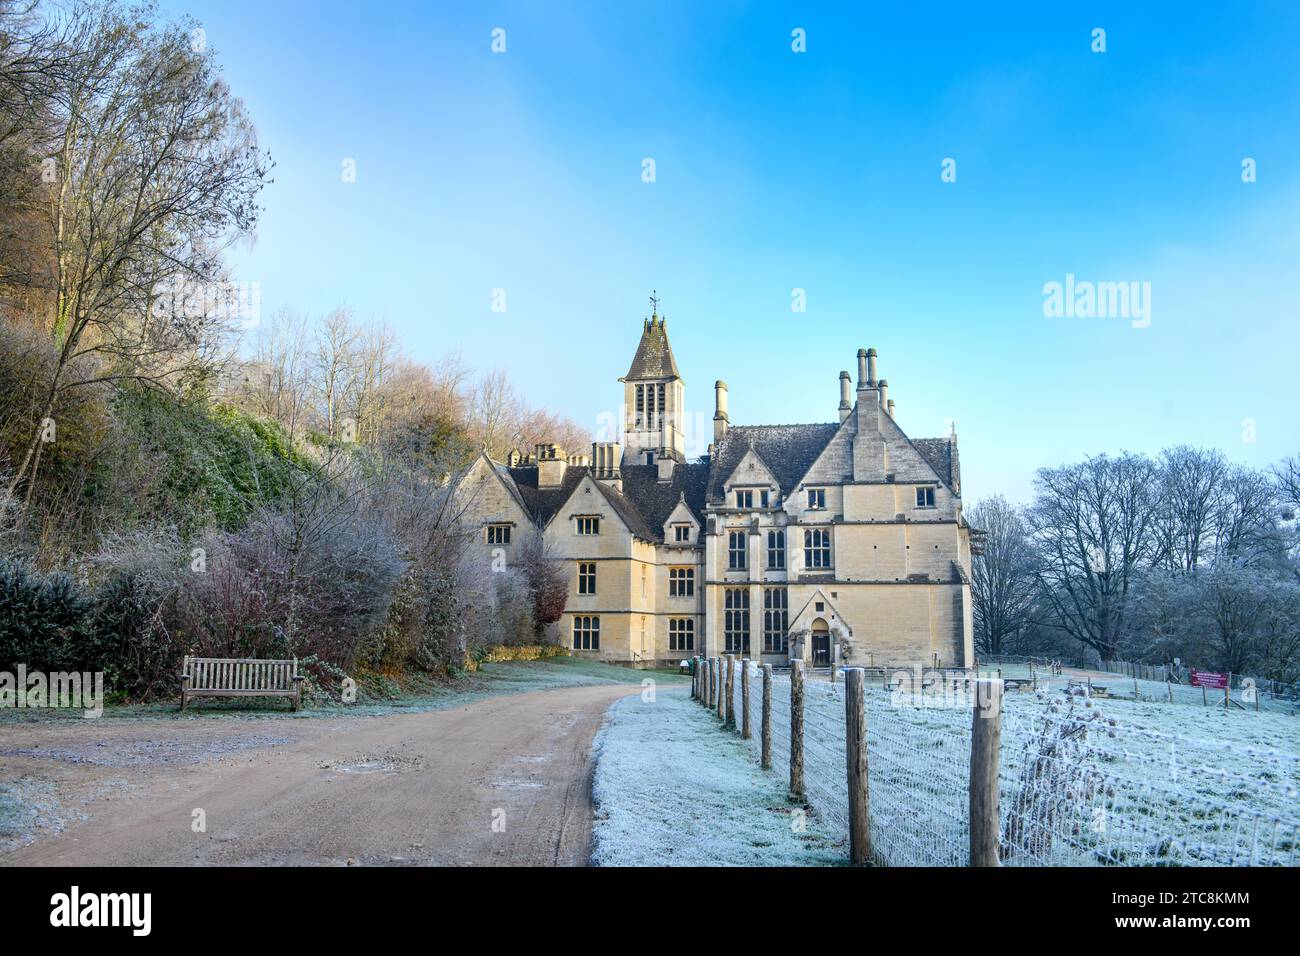 The Gothic Revival Woodchester Mansion near Nympsfield, Gloucestershire, UK. Stock Photo